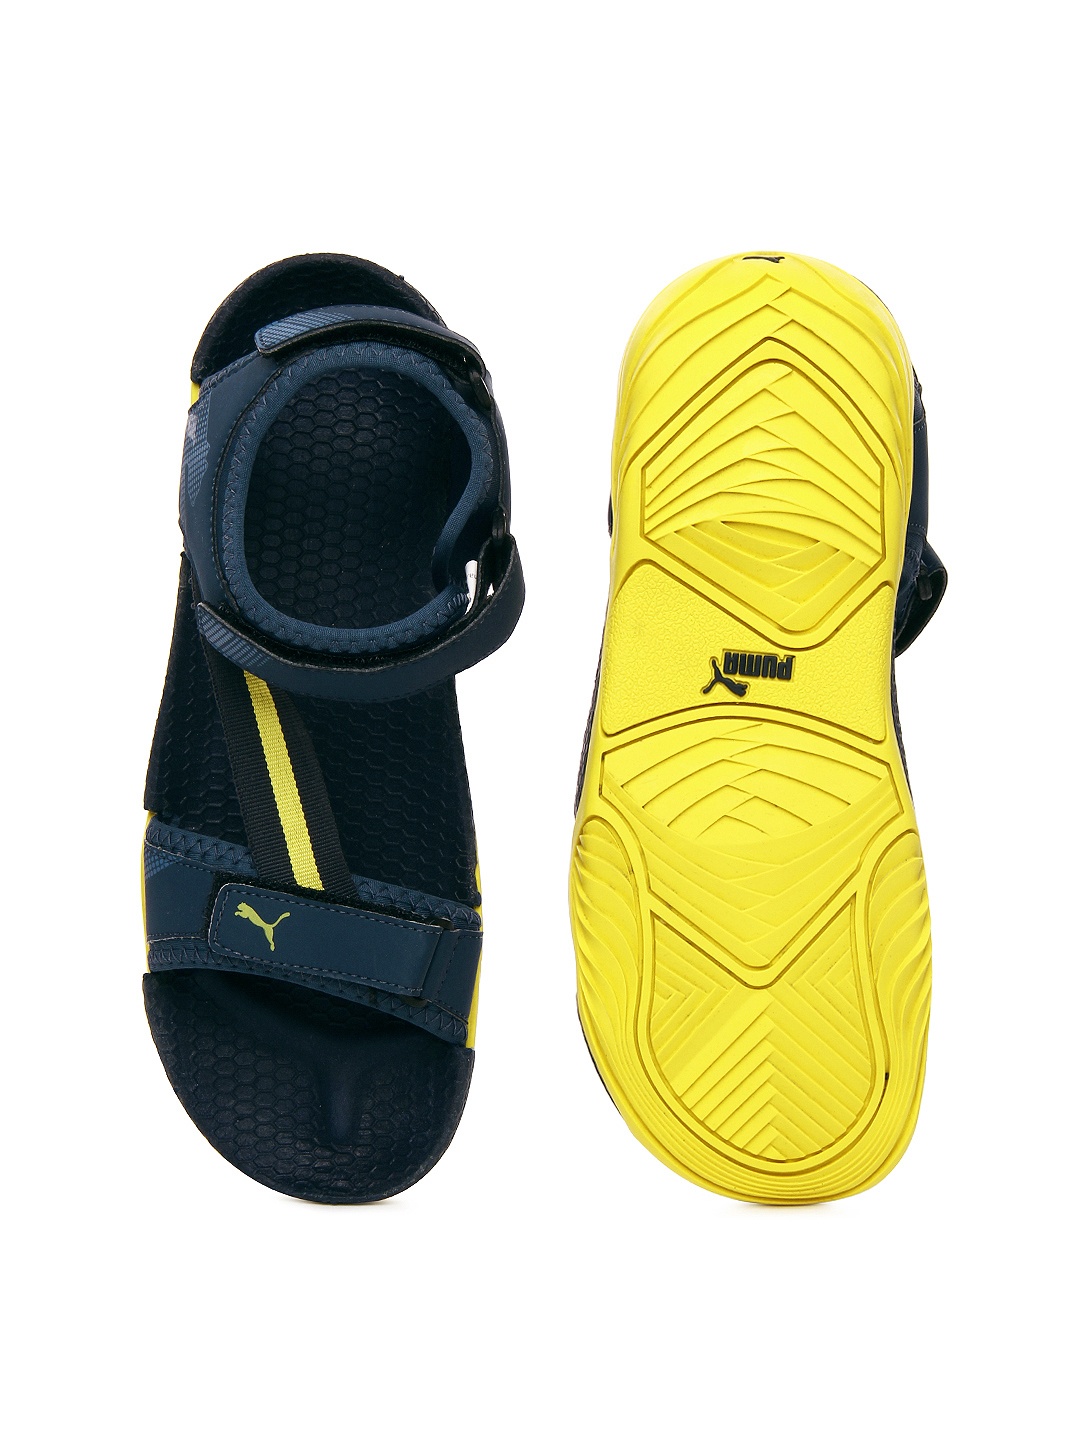 puma men's k9000 xc canvas sandals and floaters